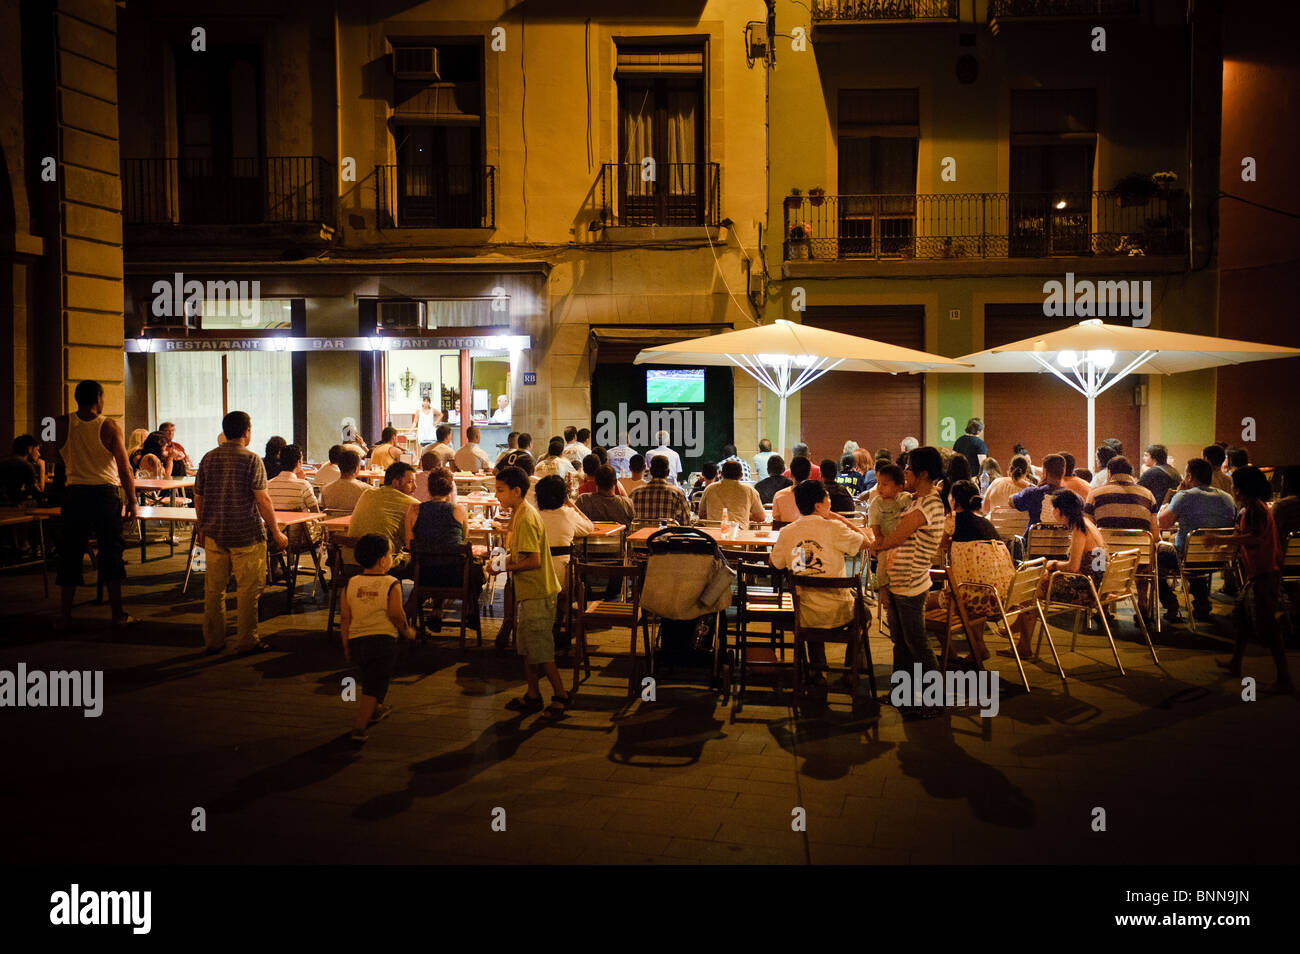 Watching the World Cup Final in a square in Manresa, Spain - Spain v Holland Stock Photo